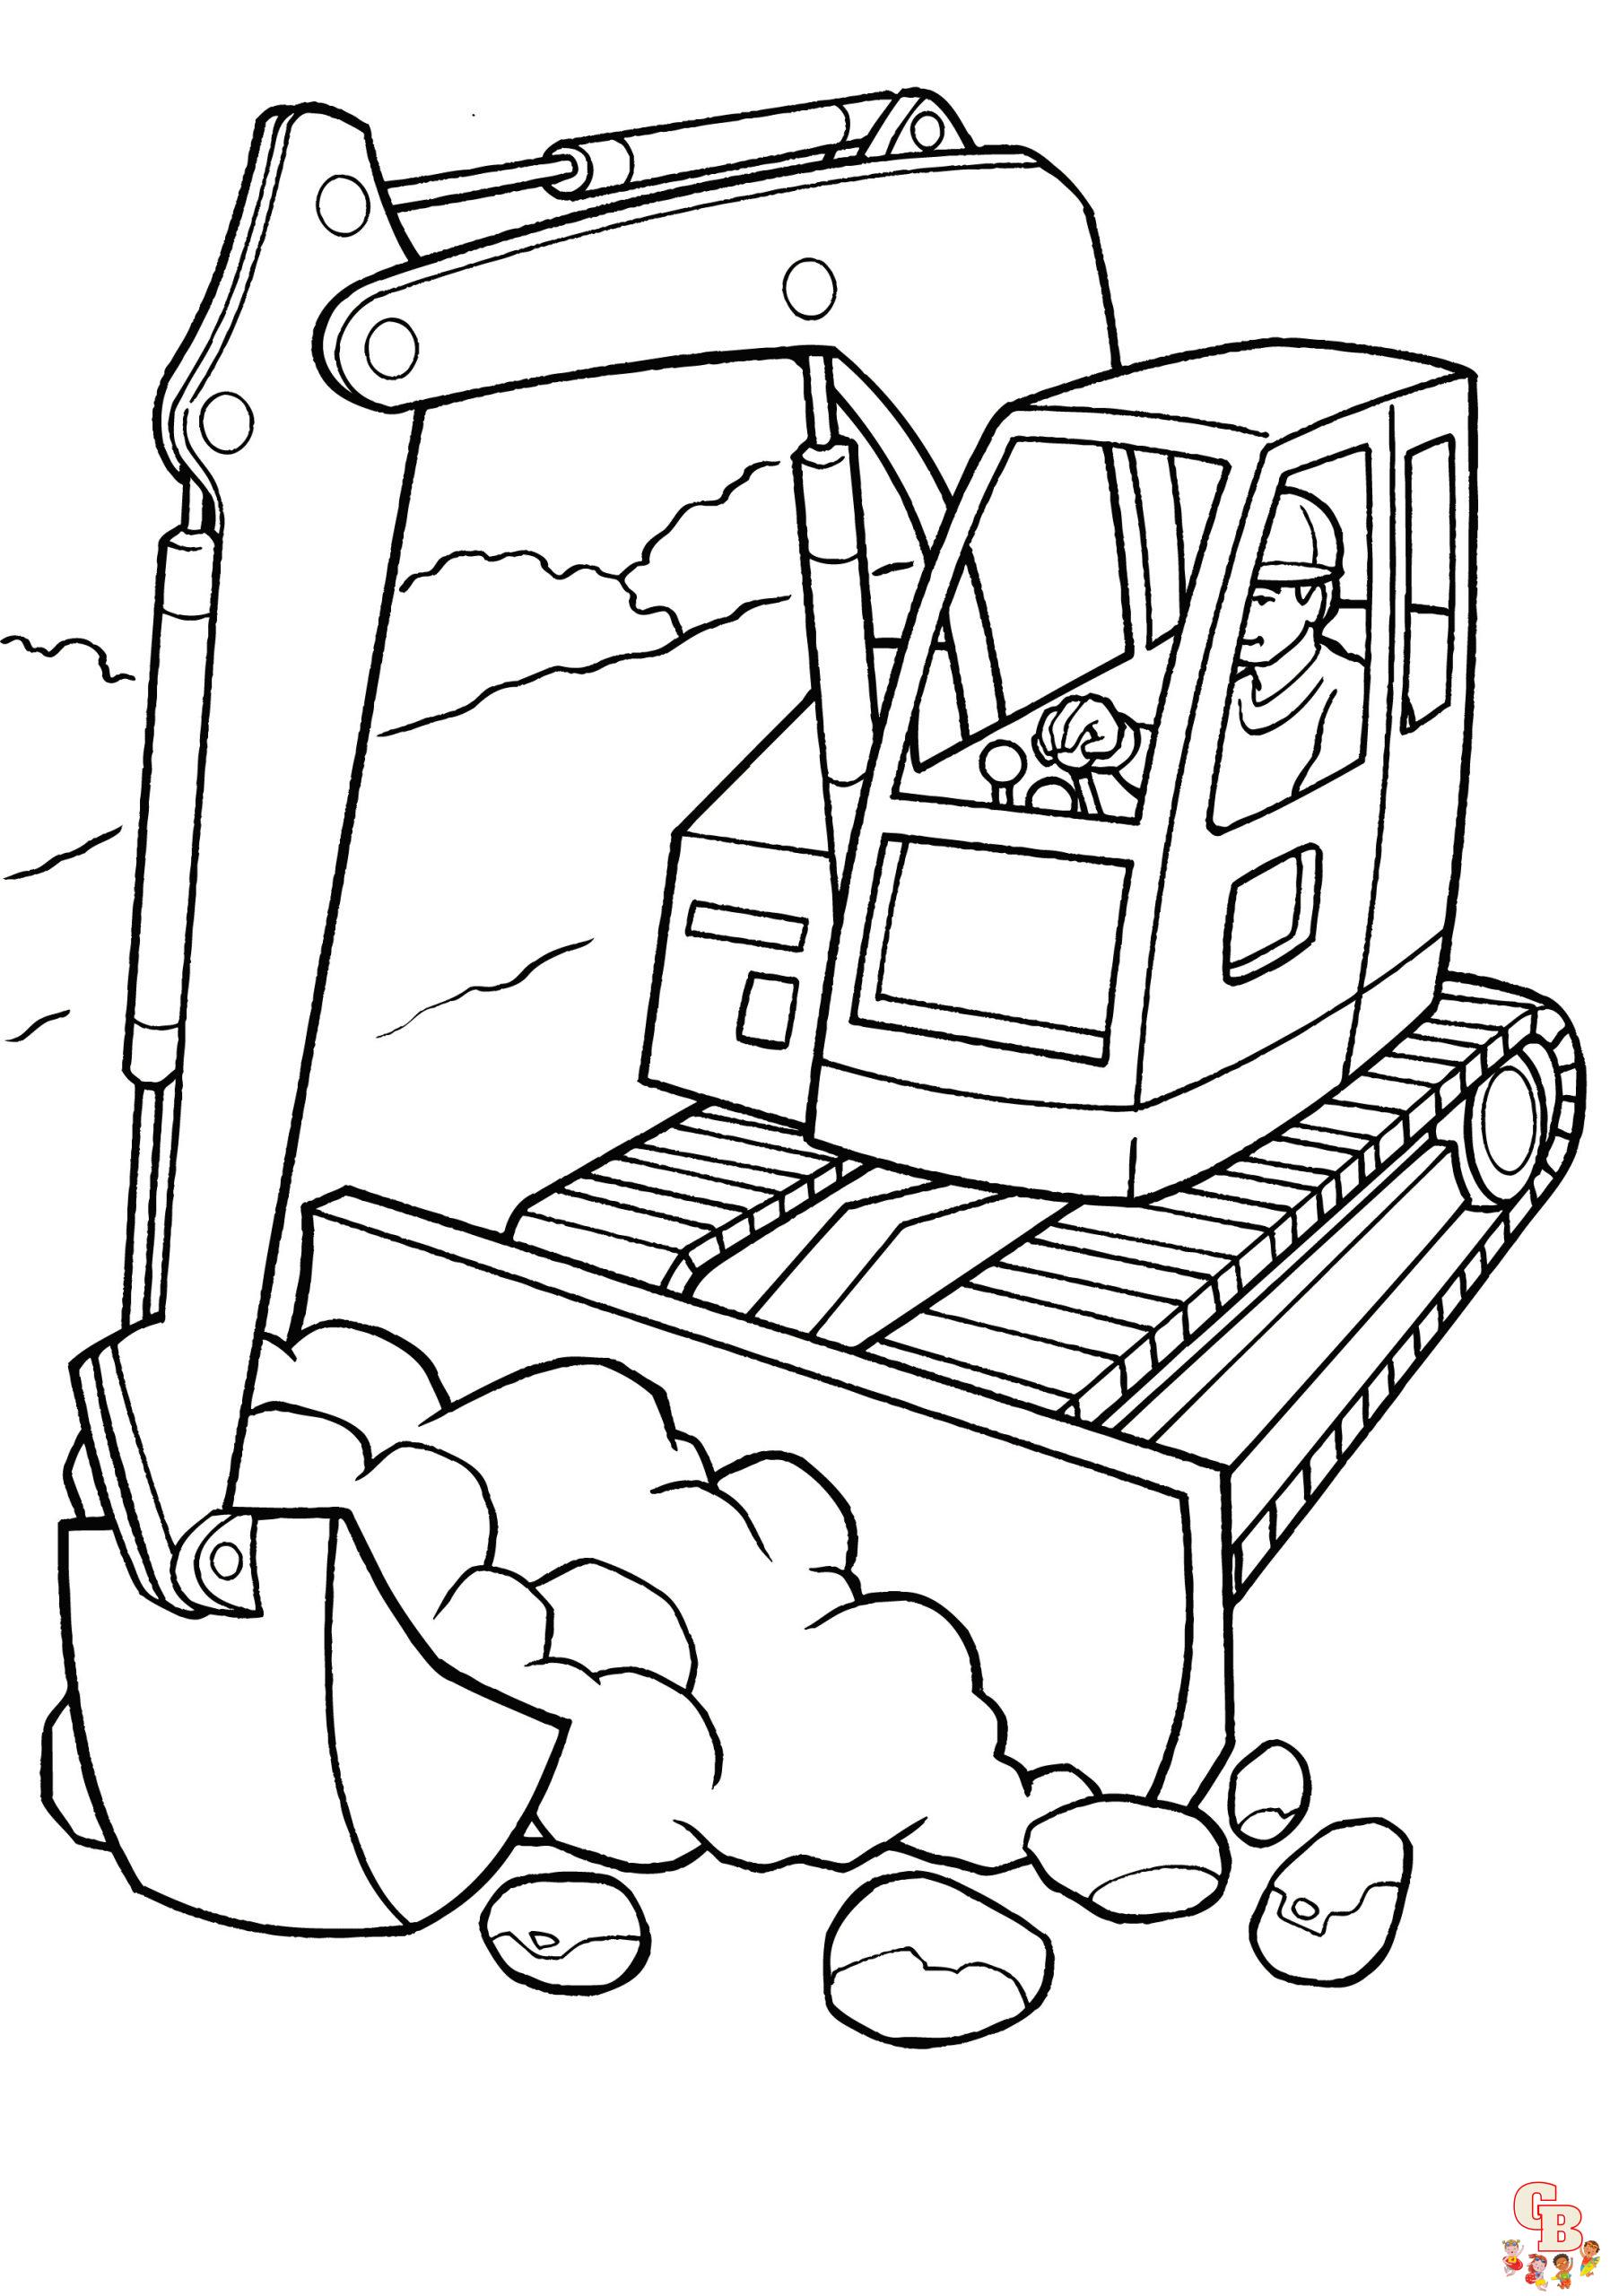 Construction coloring pages printable free easy